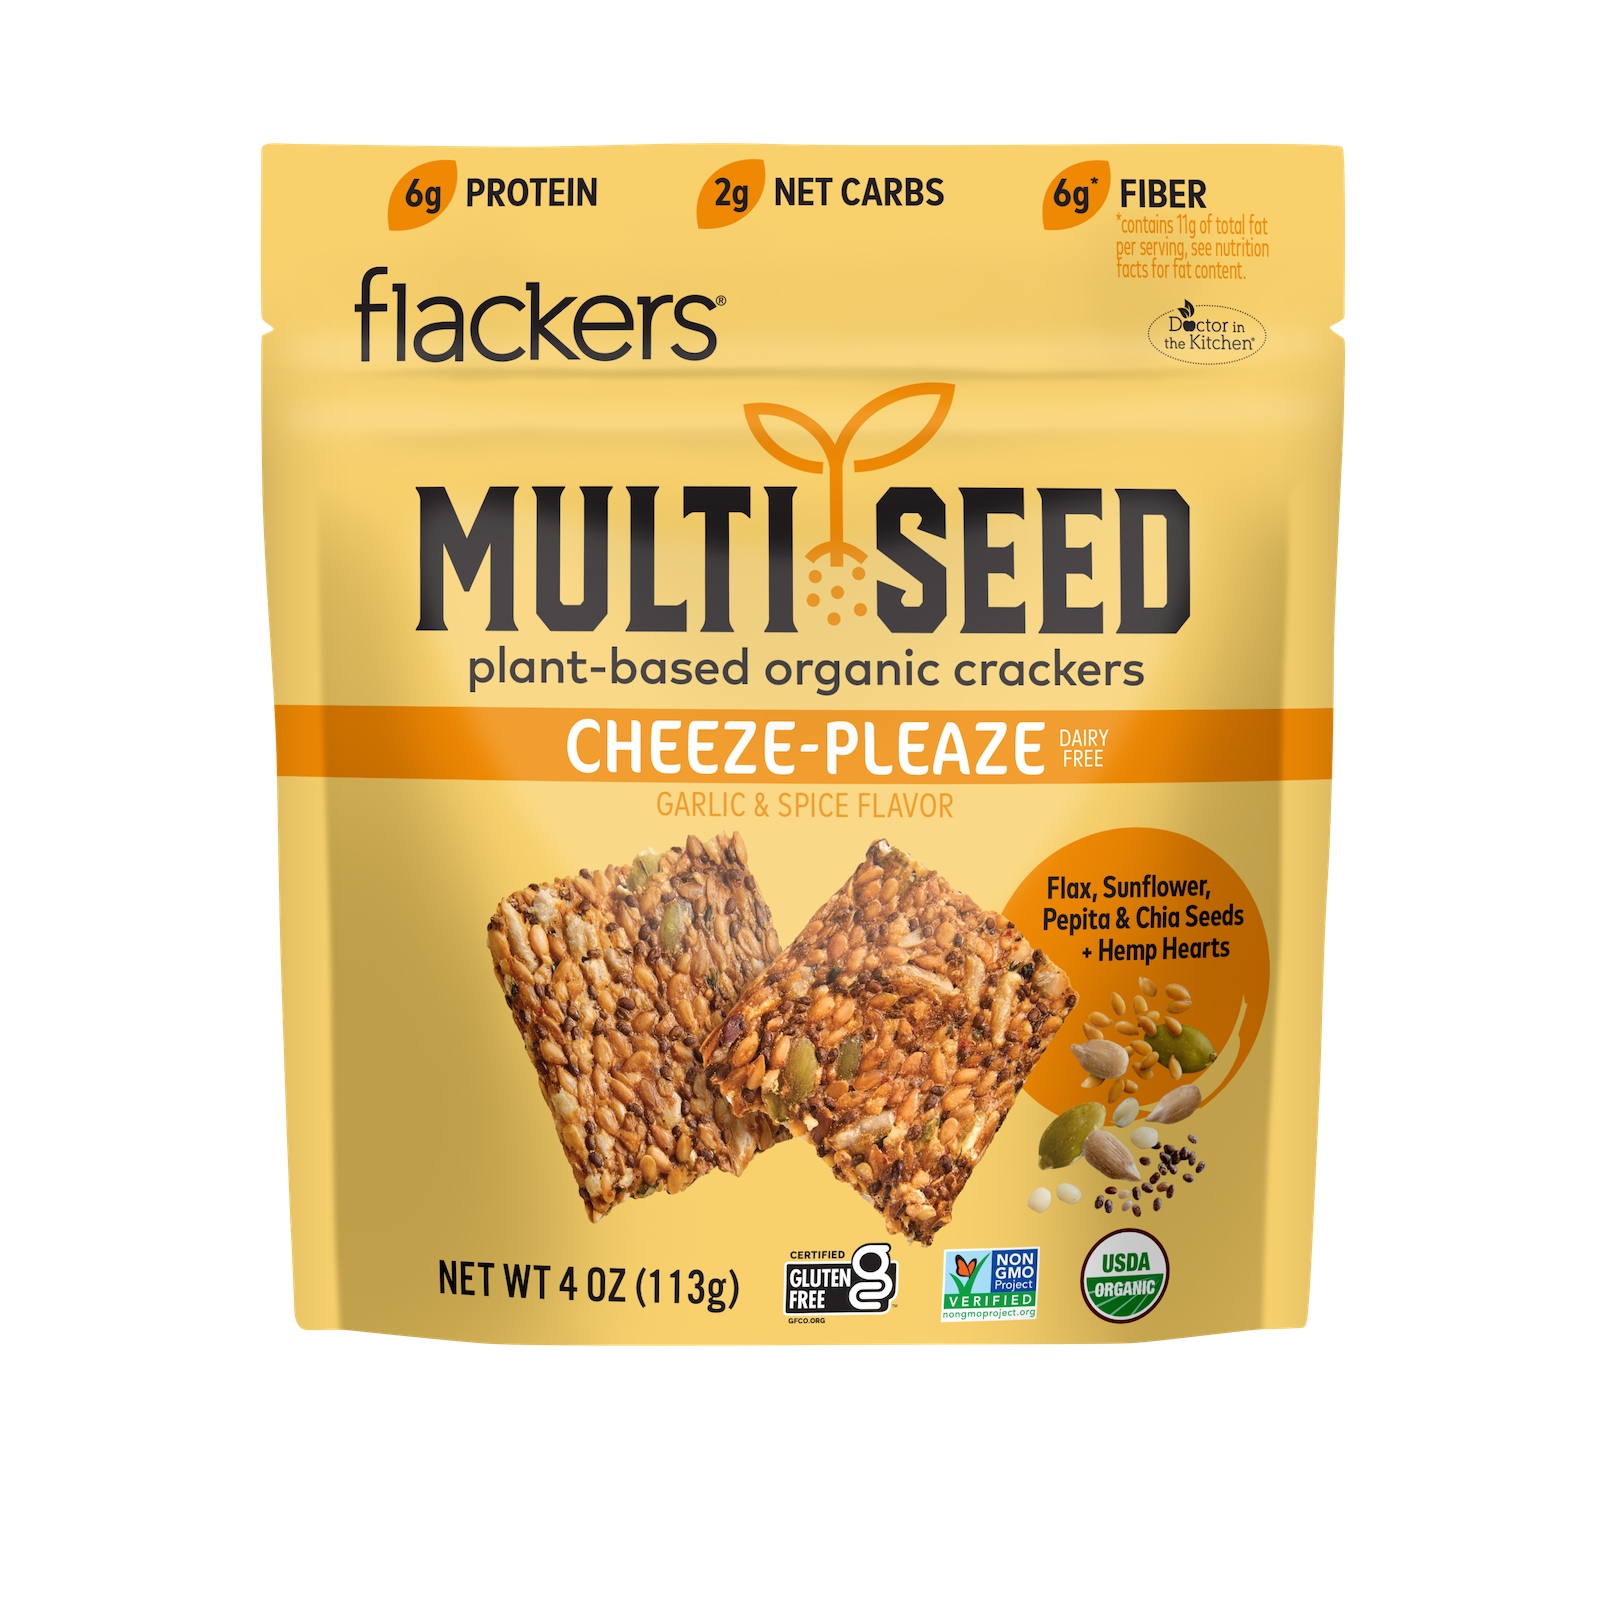 Flackers Multiseed Cheeze Please